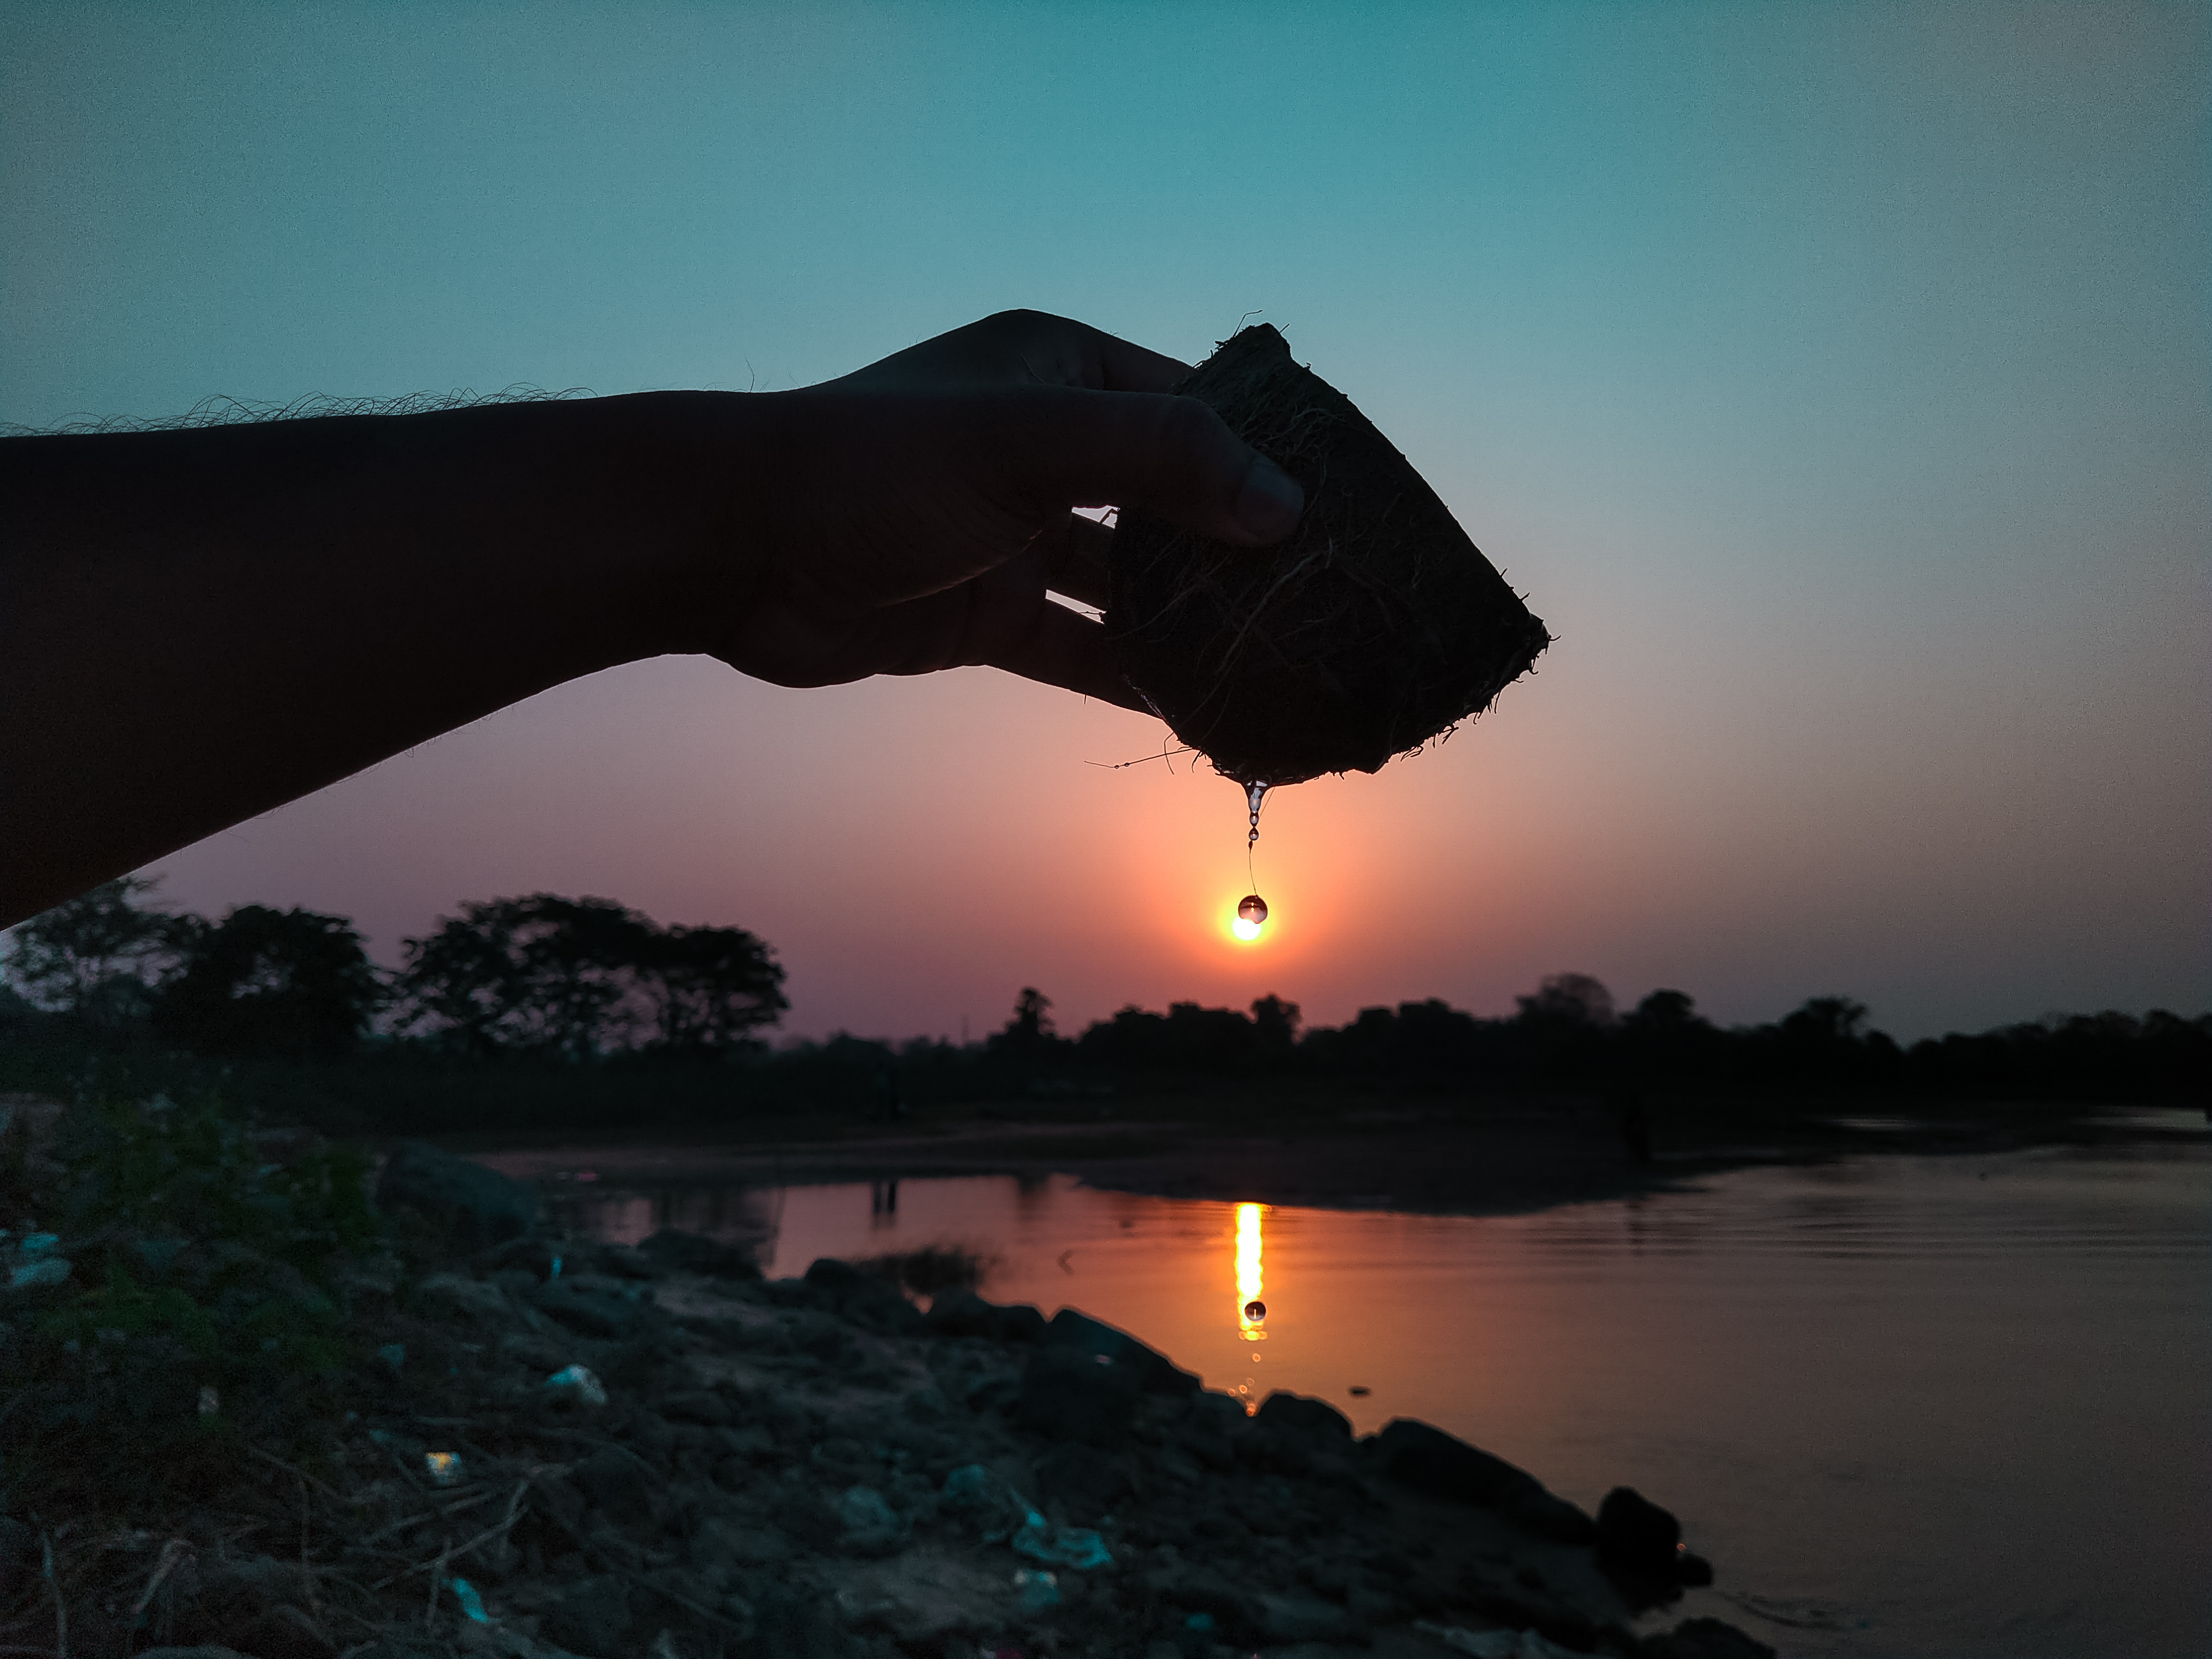 Sunset photography by Biswa890